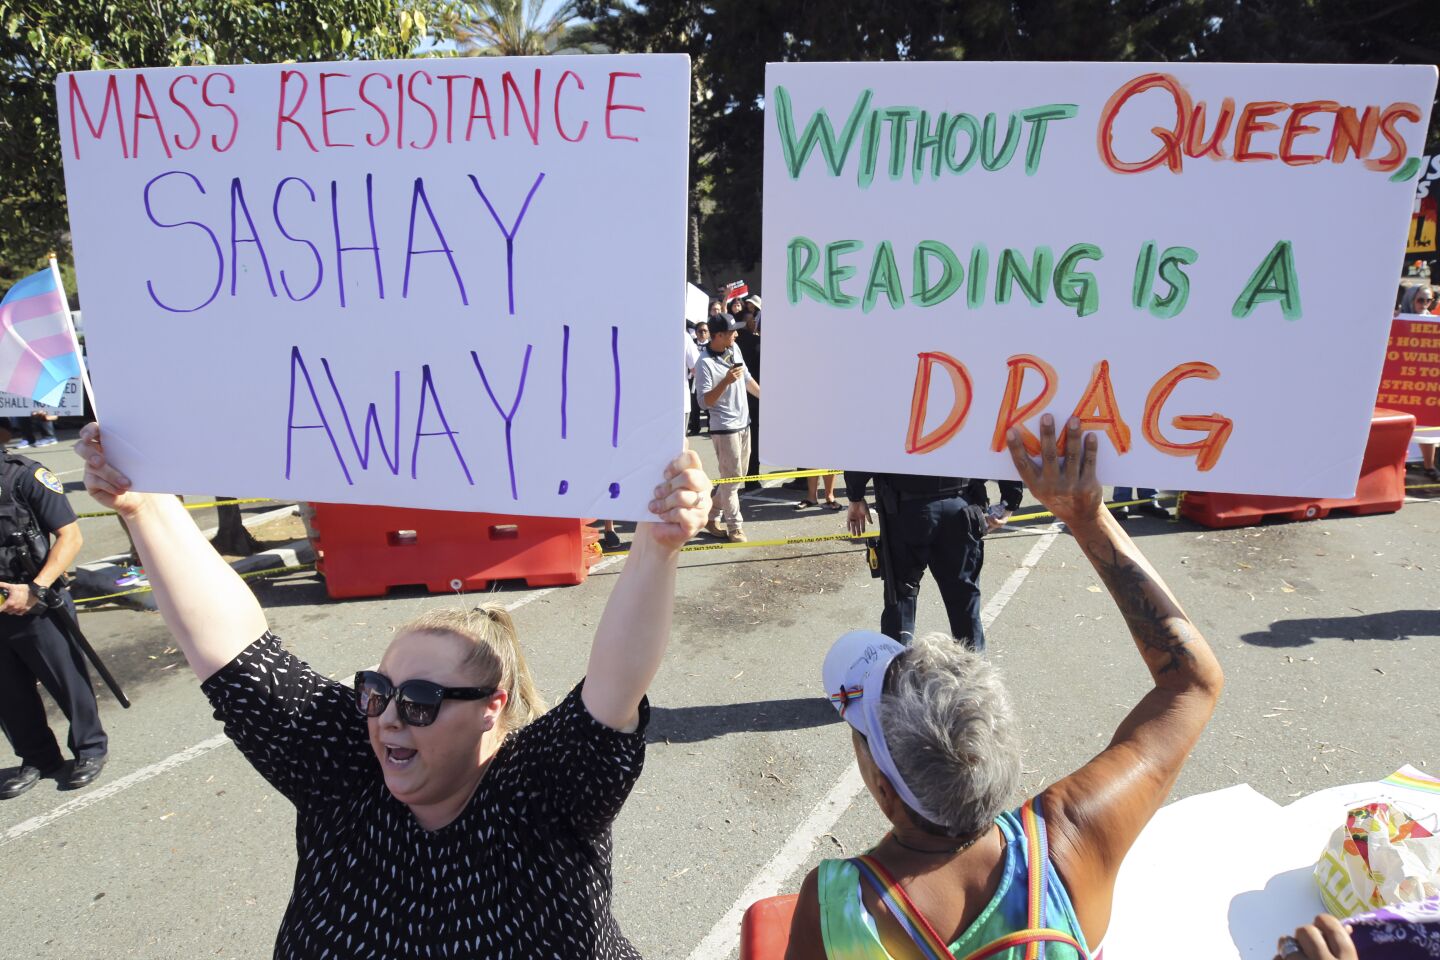 Supporters of the Drag Queen Story Hour Hannah Usher, left, and her mother Coyote Moon hold up signs at the Chula Vista Public Library, Civic Center Branch, on Tuesday, September 10, 2019 in Chula Vista, California.